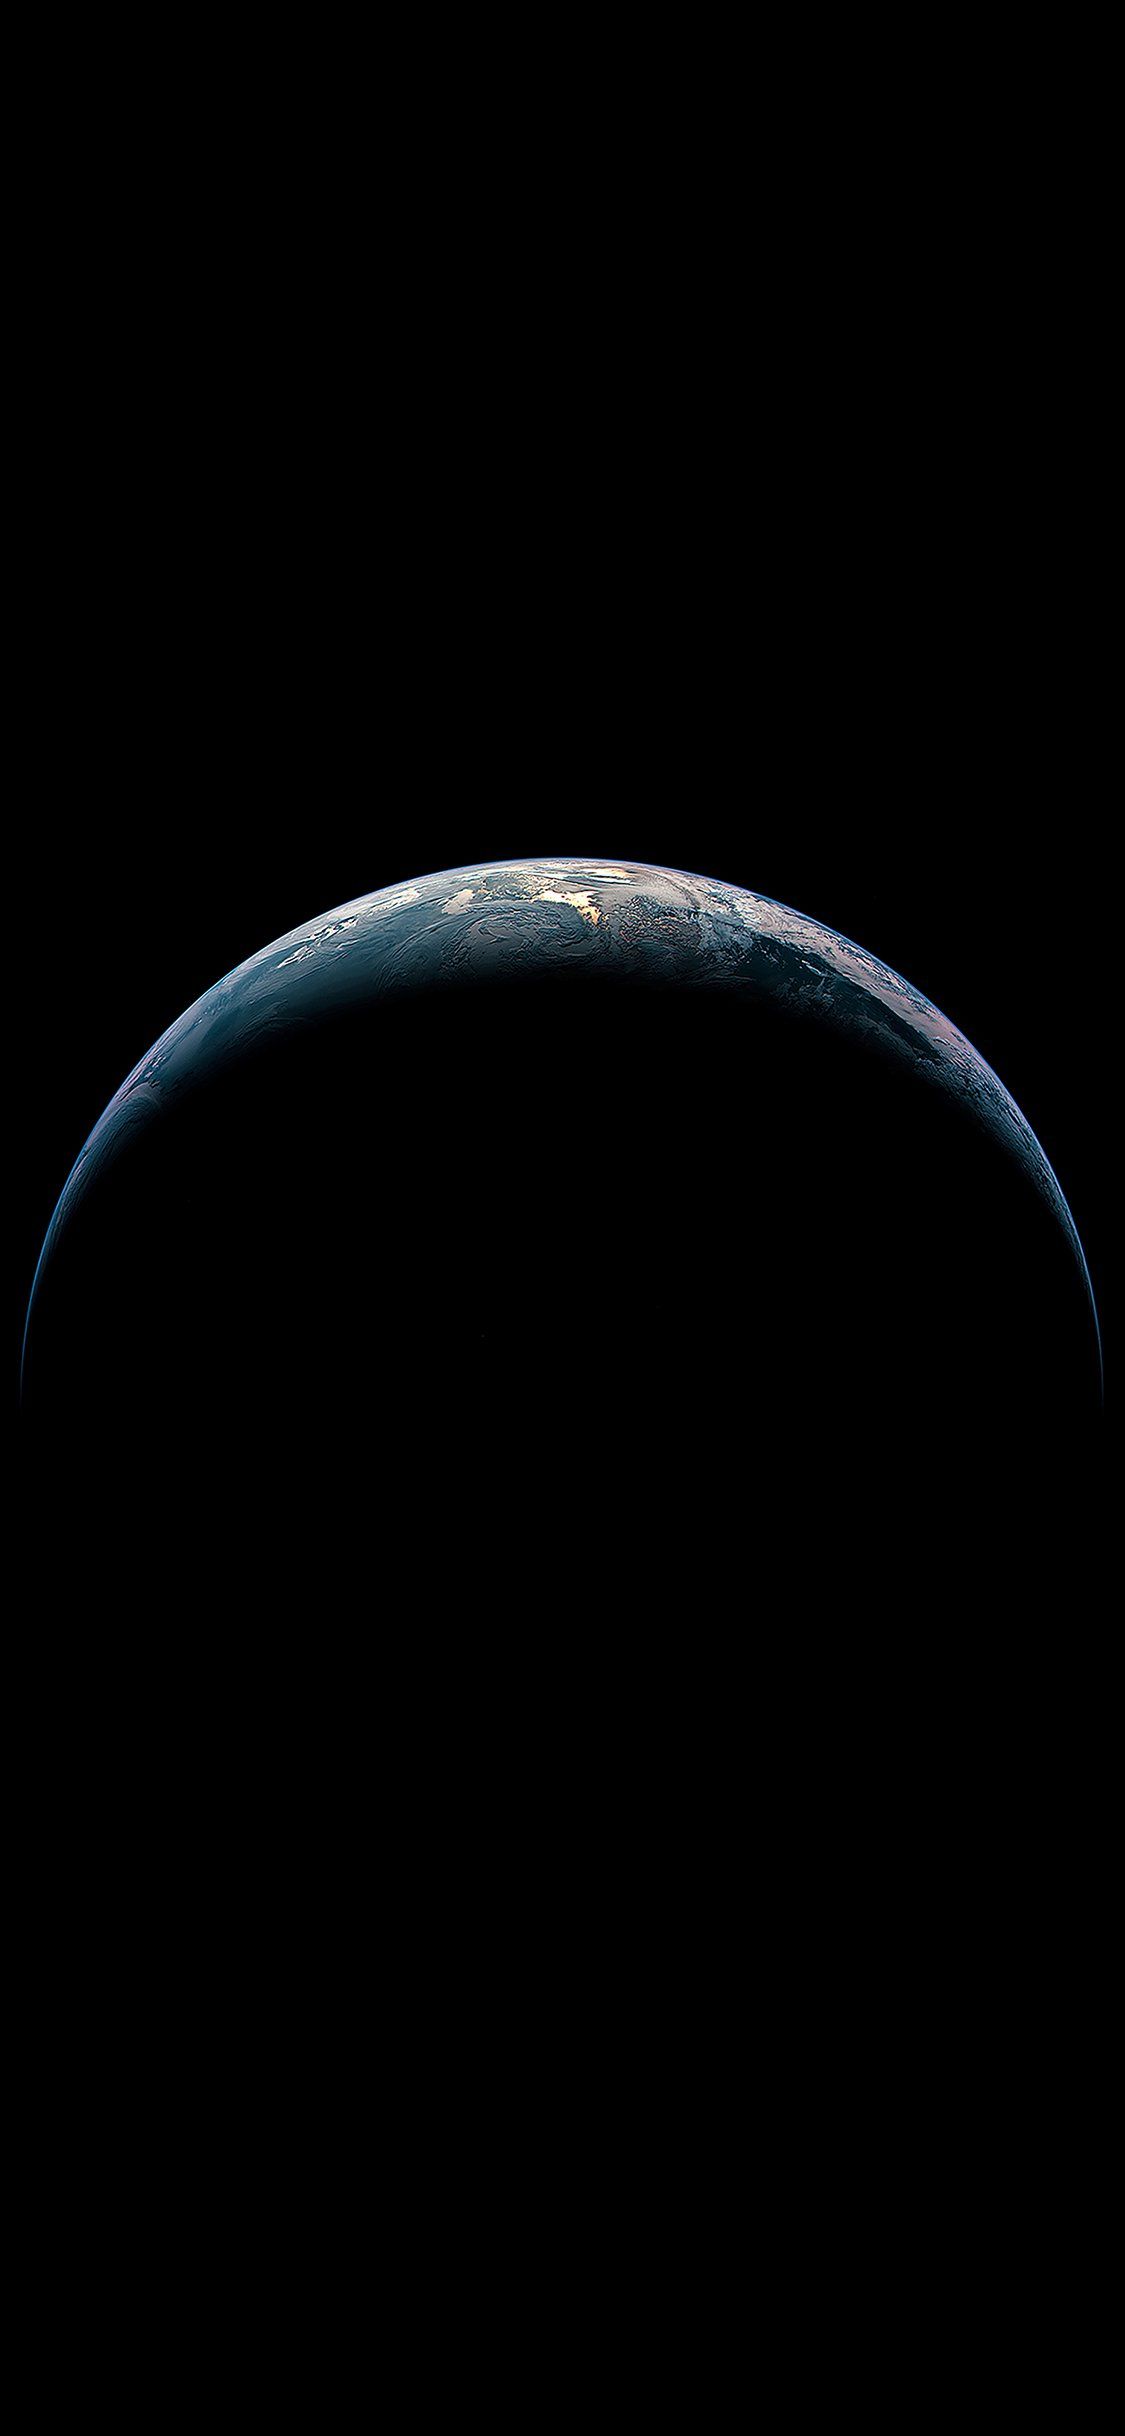 Earth from sky iPhone 11 Wallpaper Free Download